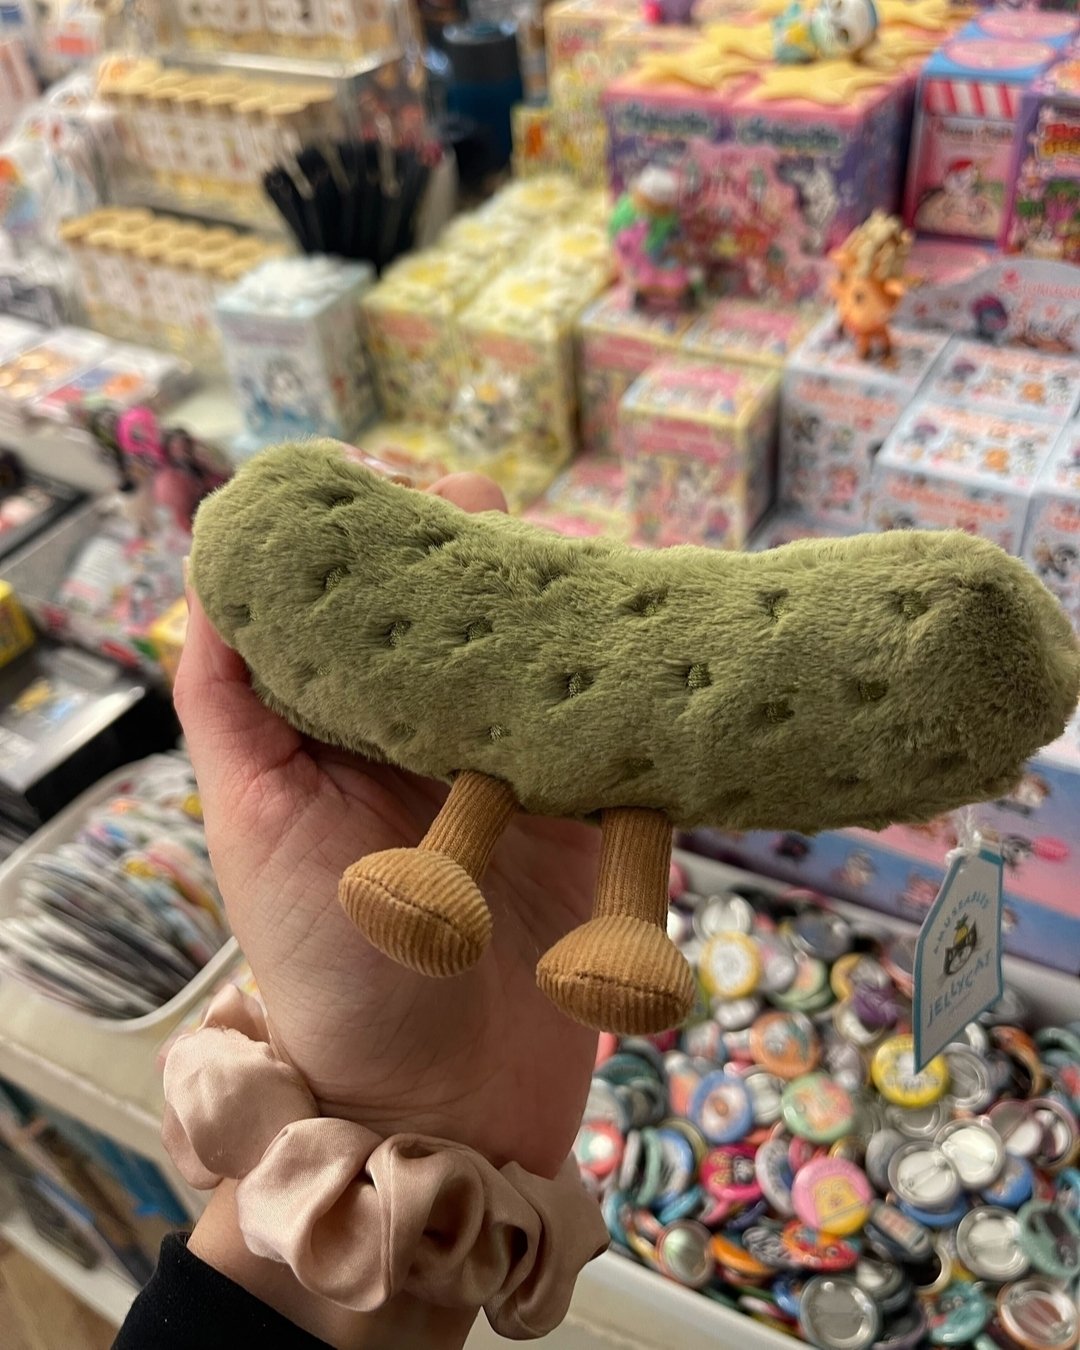 The mysterious case of the faceless pickle! Face or not, it's still cute and cuddly ;)